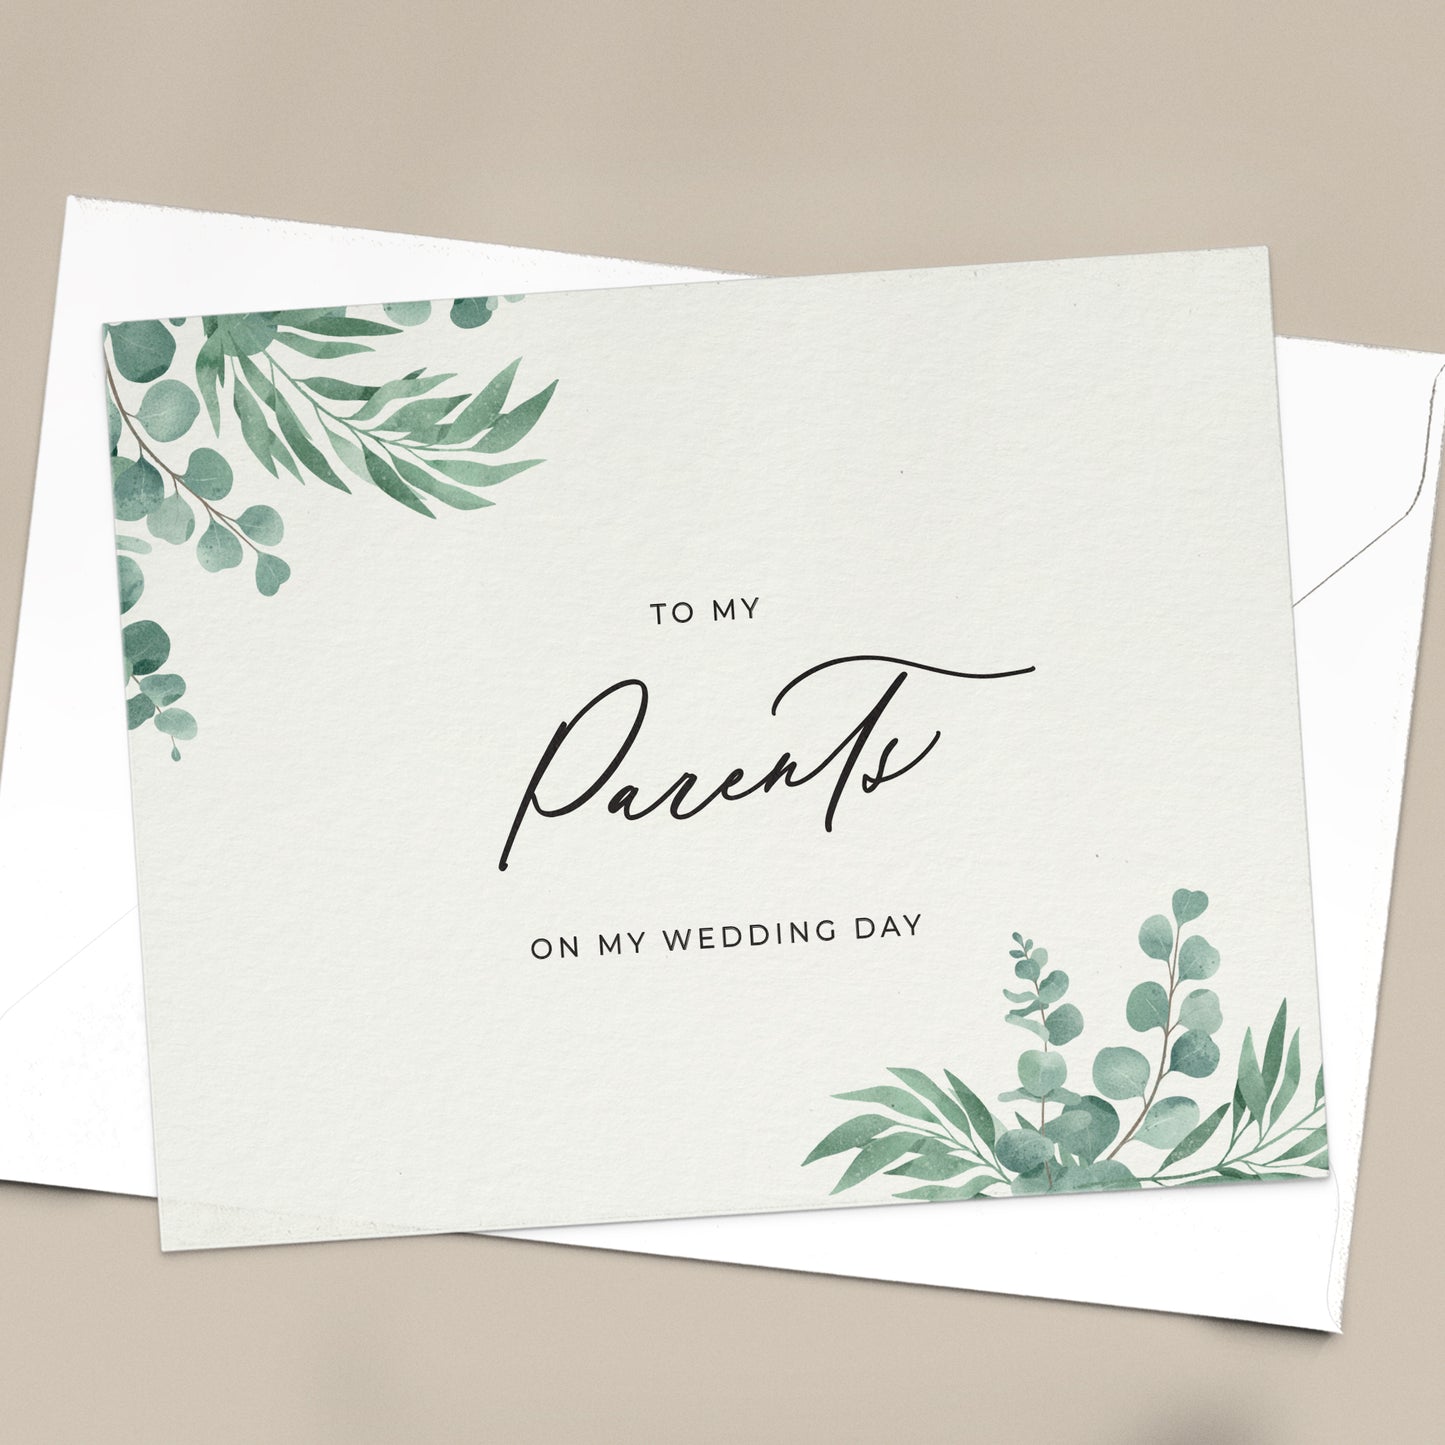 To my parents on my wedding day note card in greenery design with eucalyptus leaves and calligraphy font from XOXOKristen.